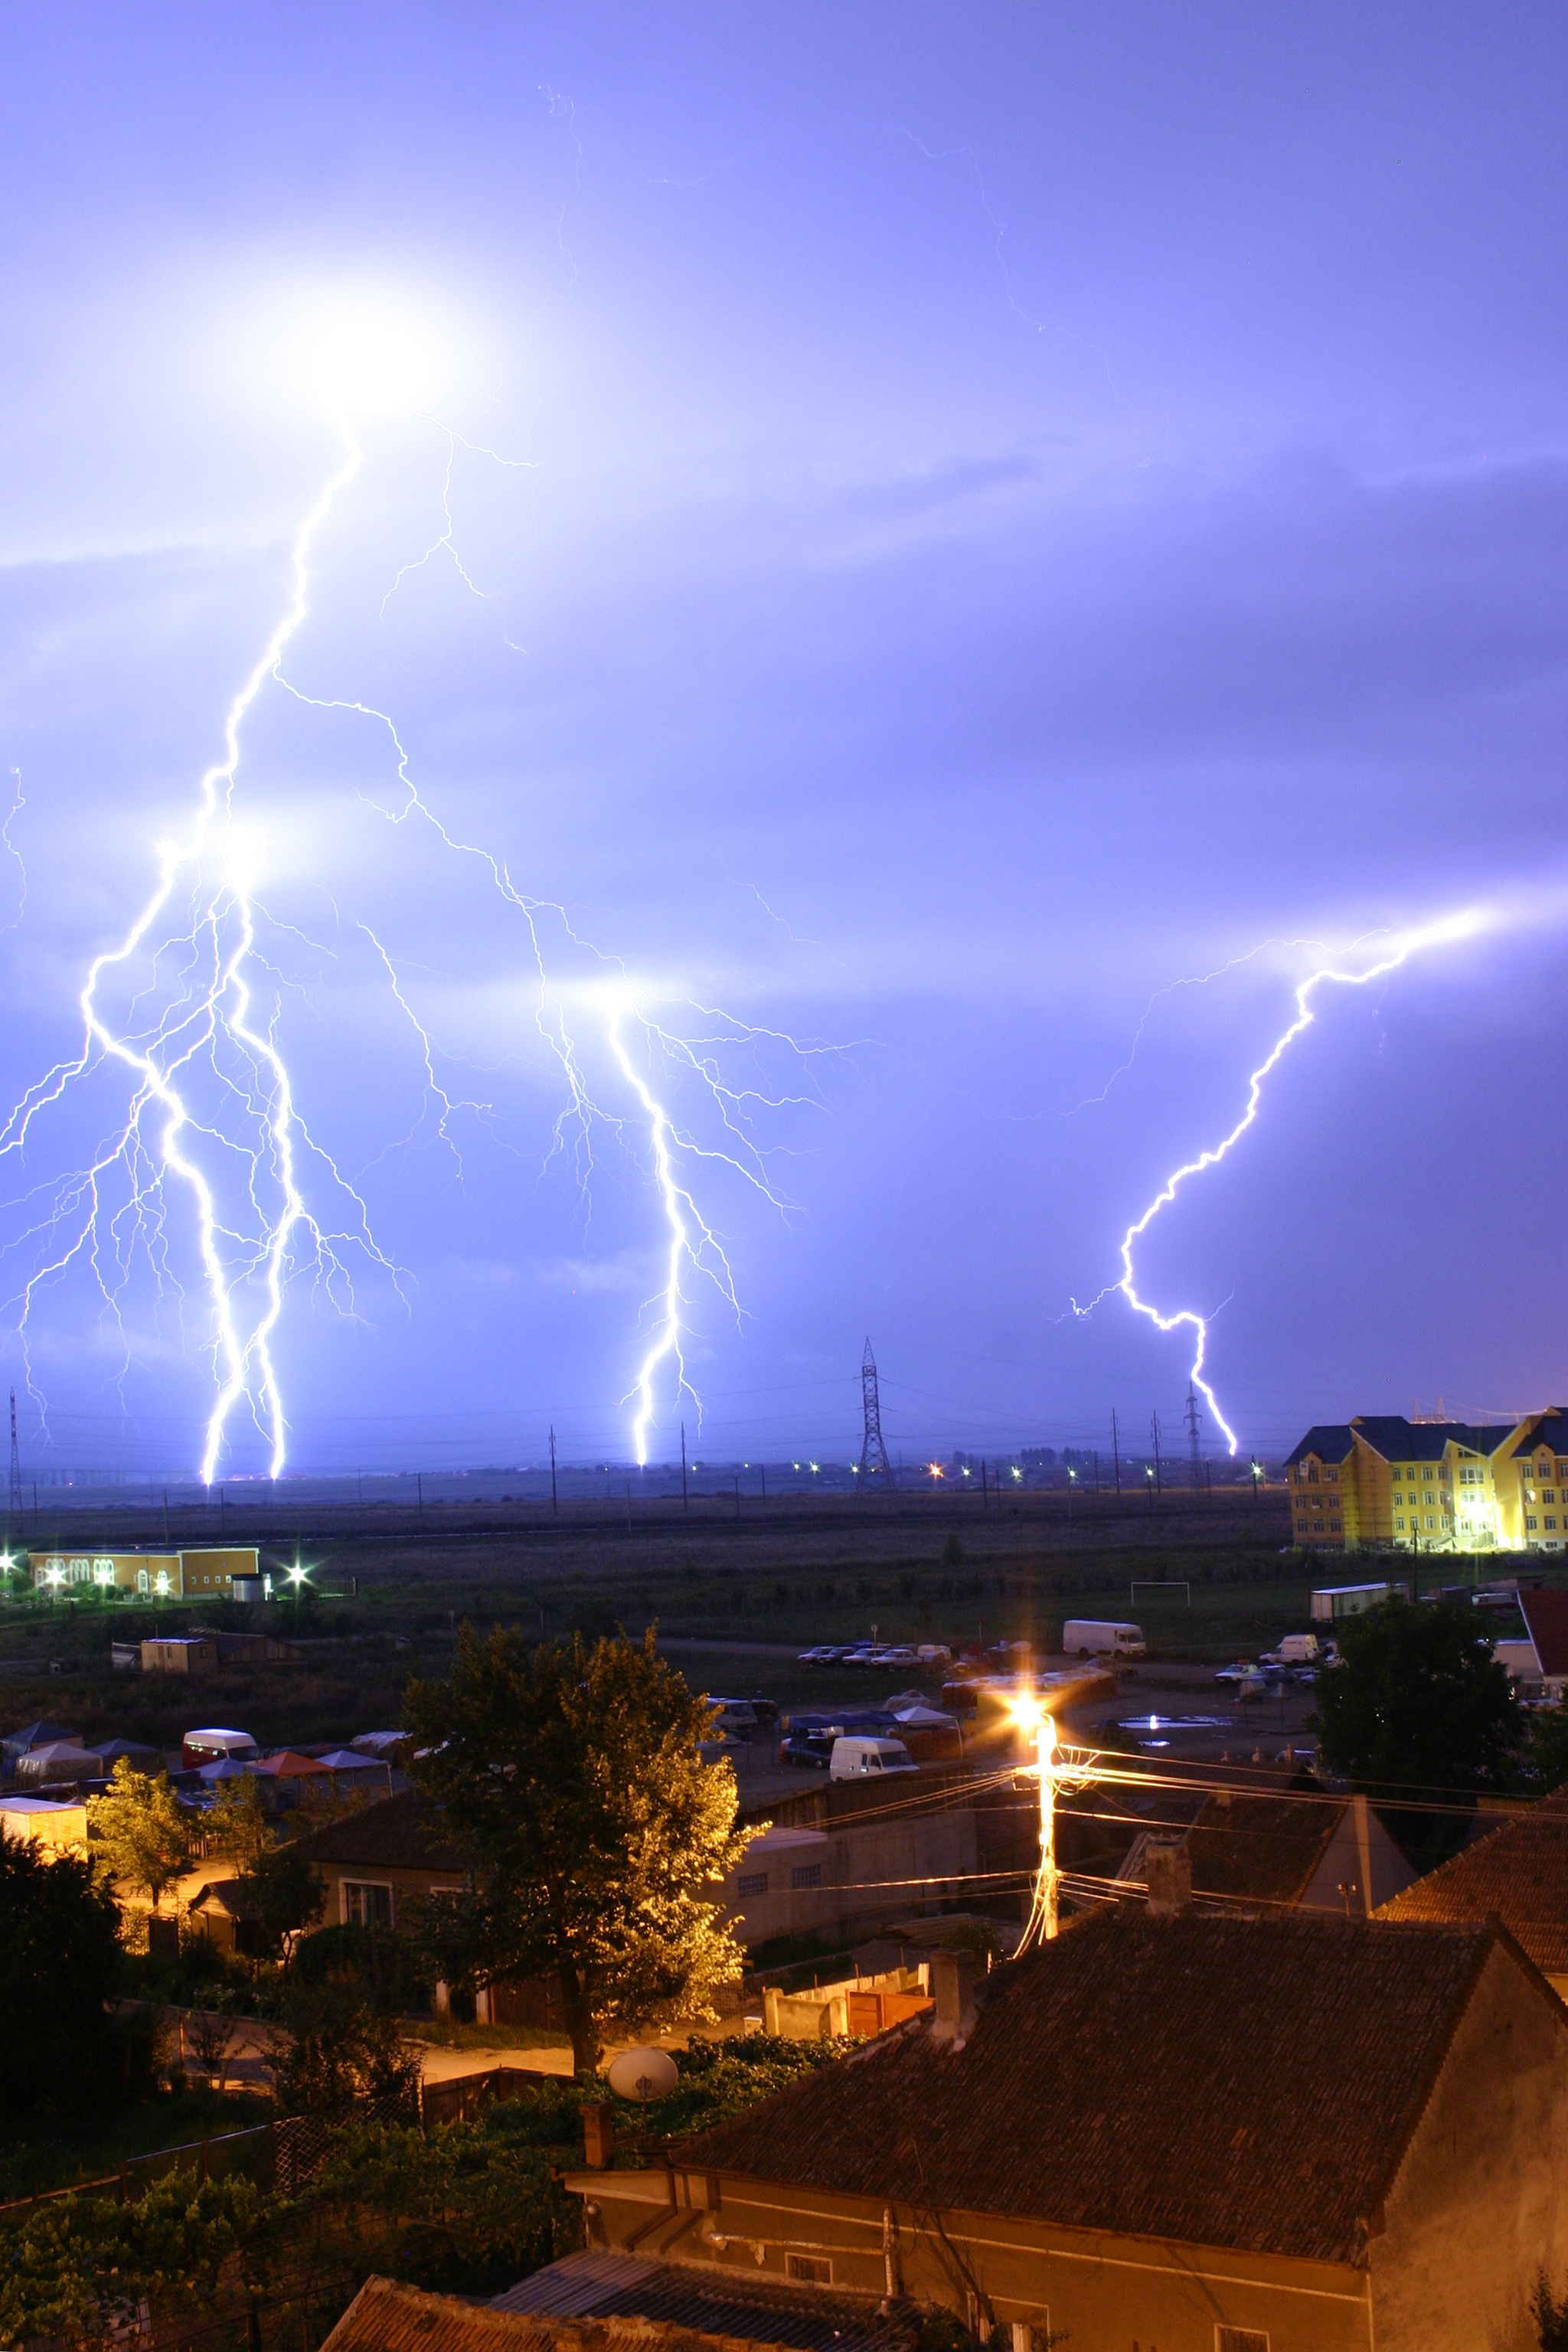 Lightning over the outskirts of Oradea, Romania, August 17, 2005